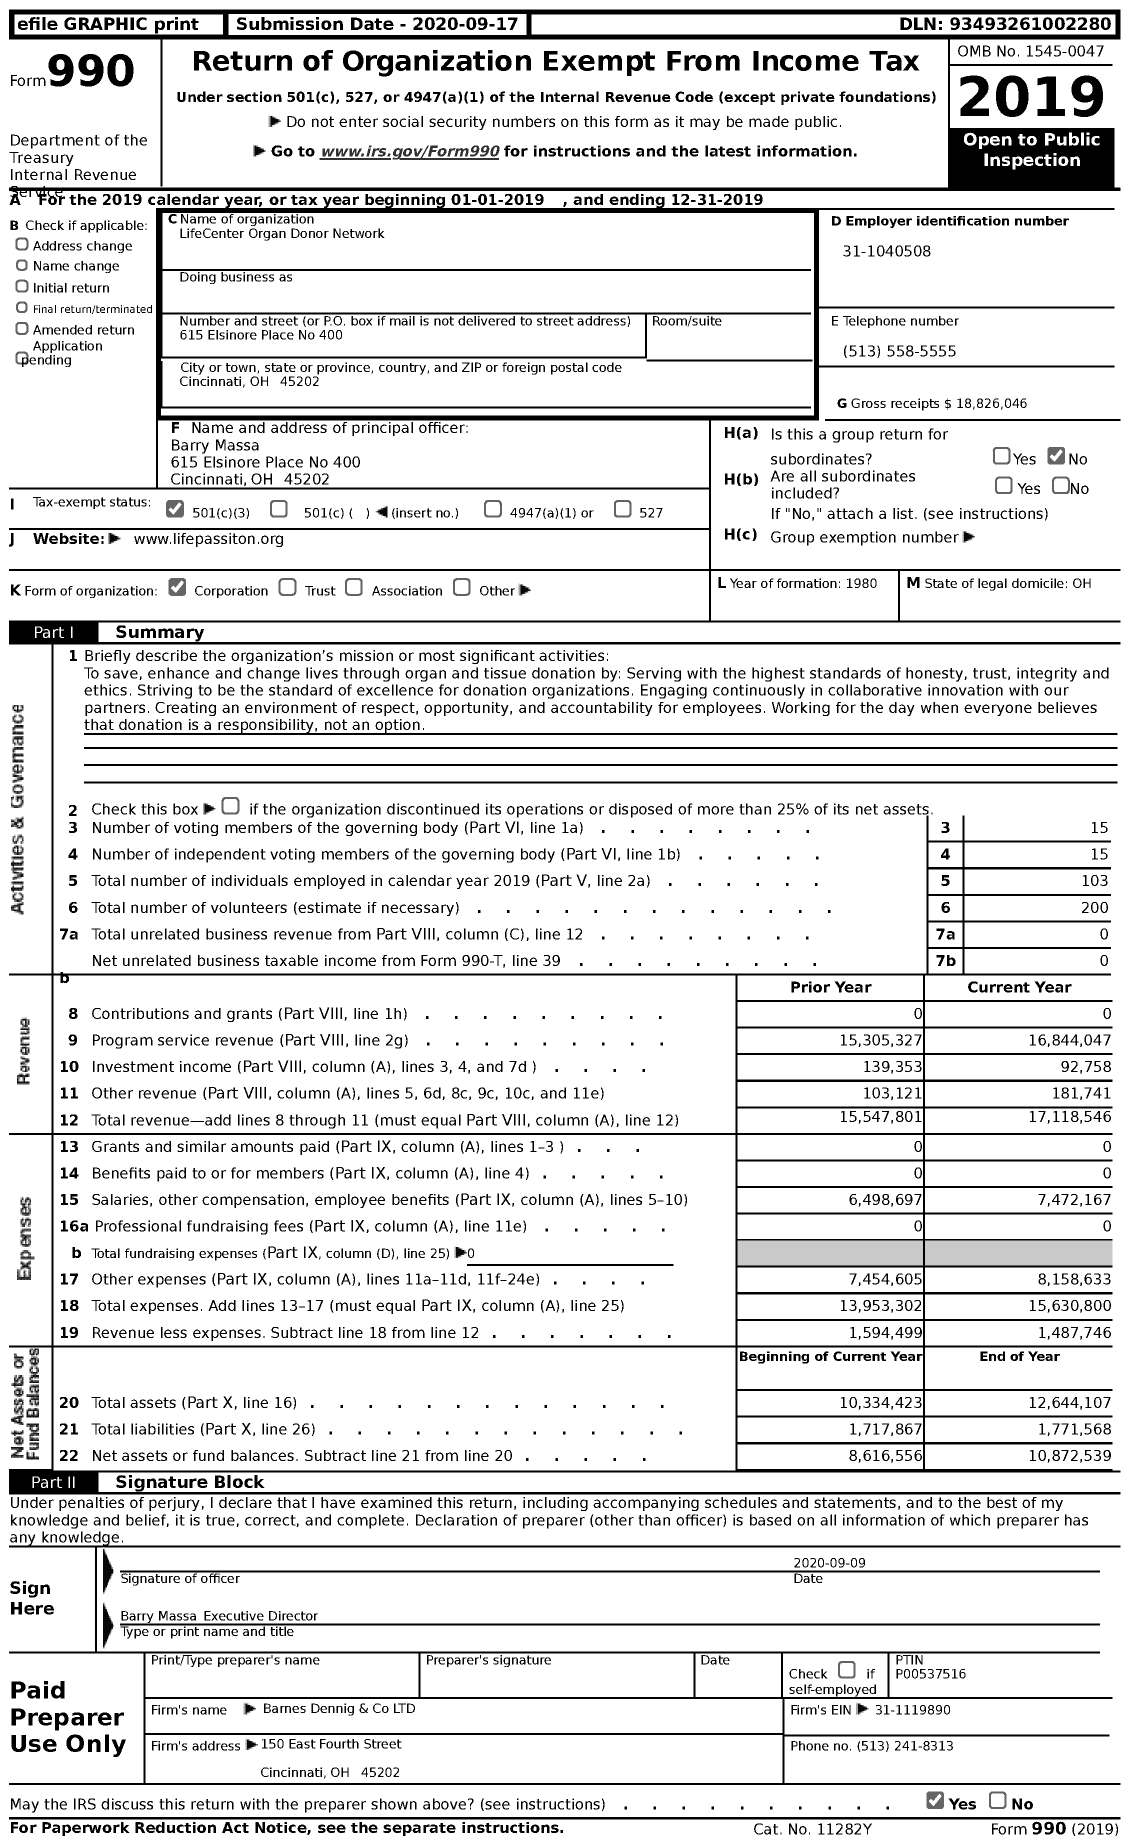 Image of first page of 2019 Form 990 for LifeCenter Organ Donor Network